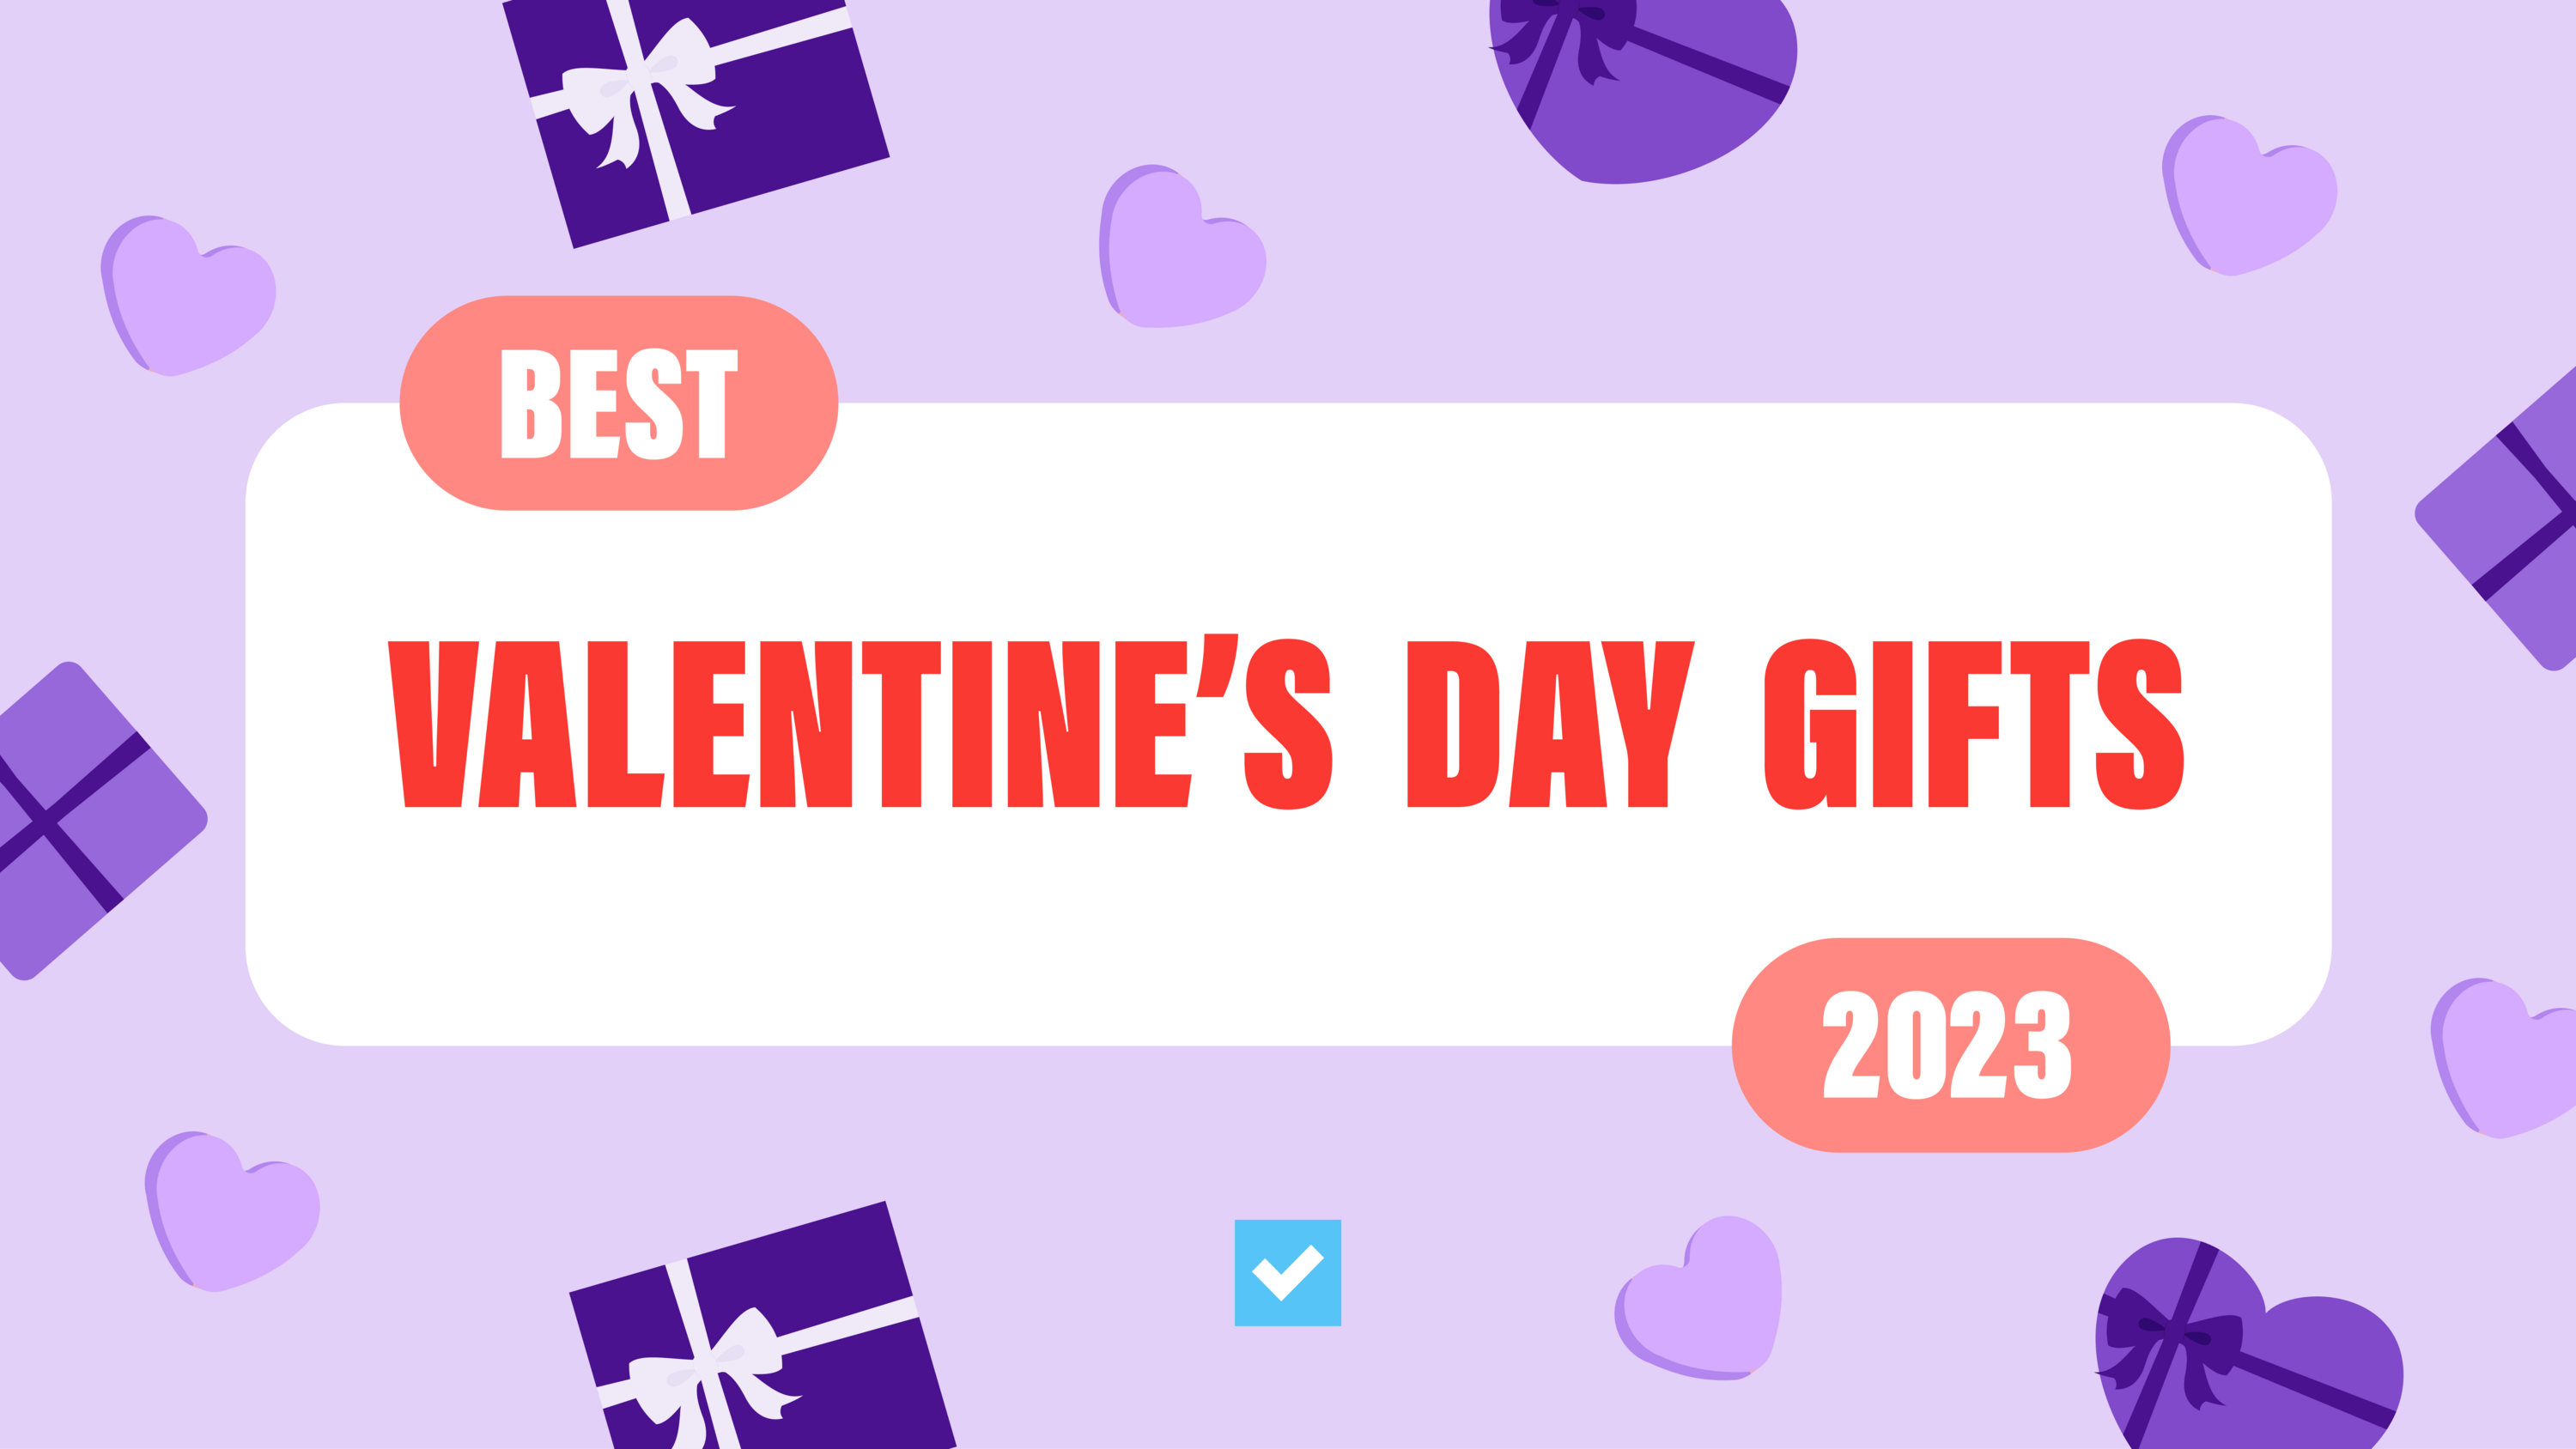 The best Valentine's Day gifts for all of your loved ones in 2023